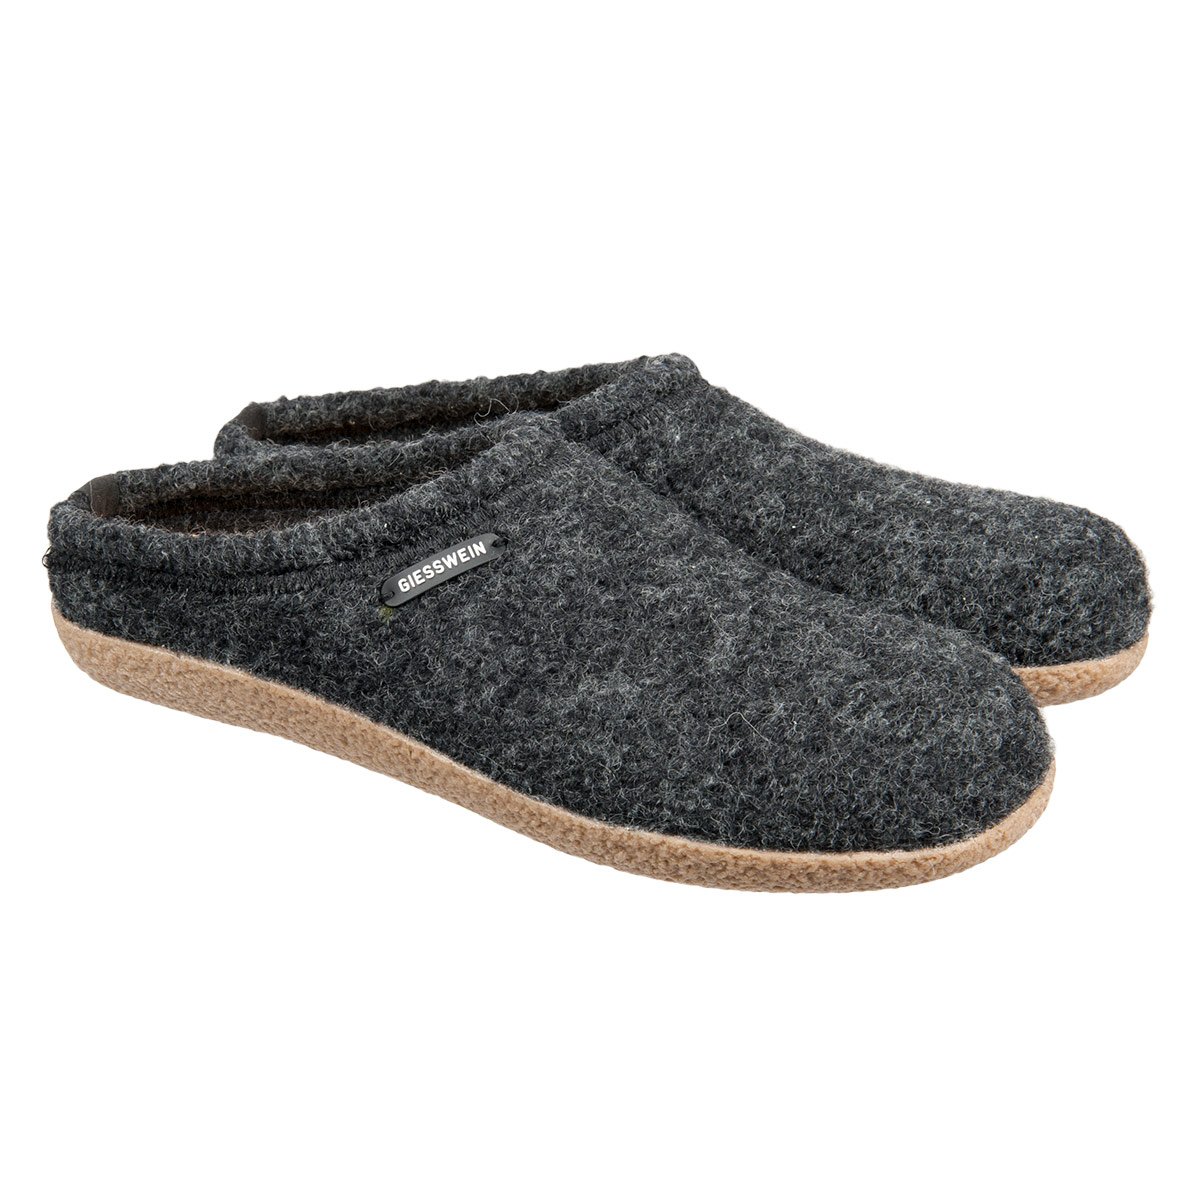 Veitsch slippers for men and women by 